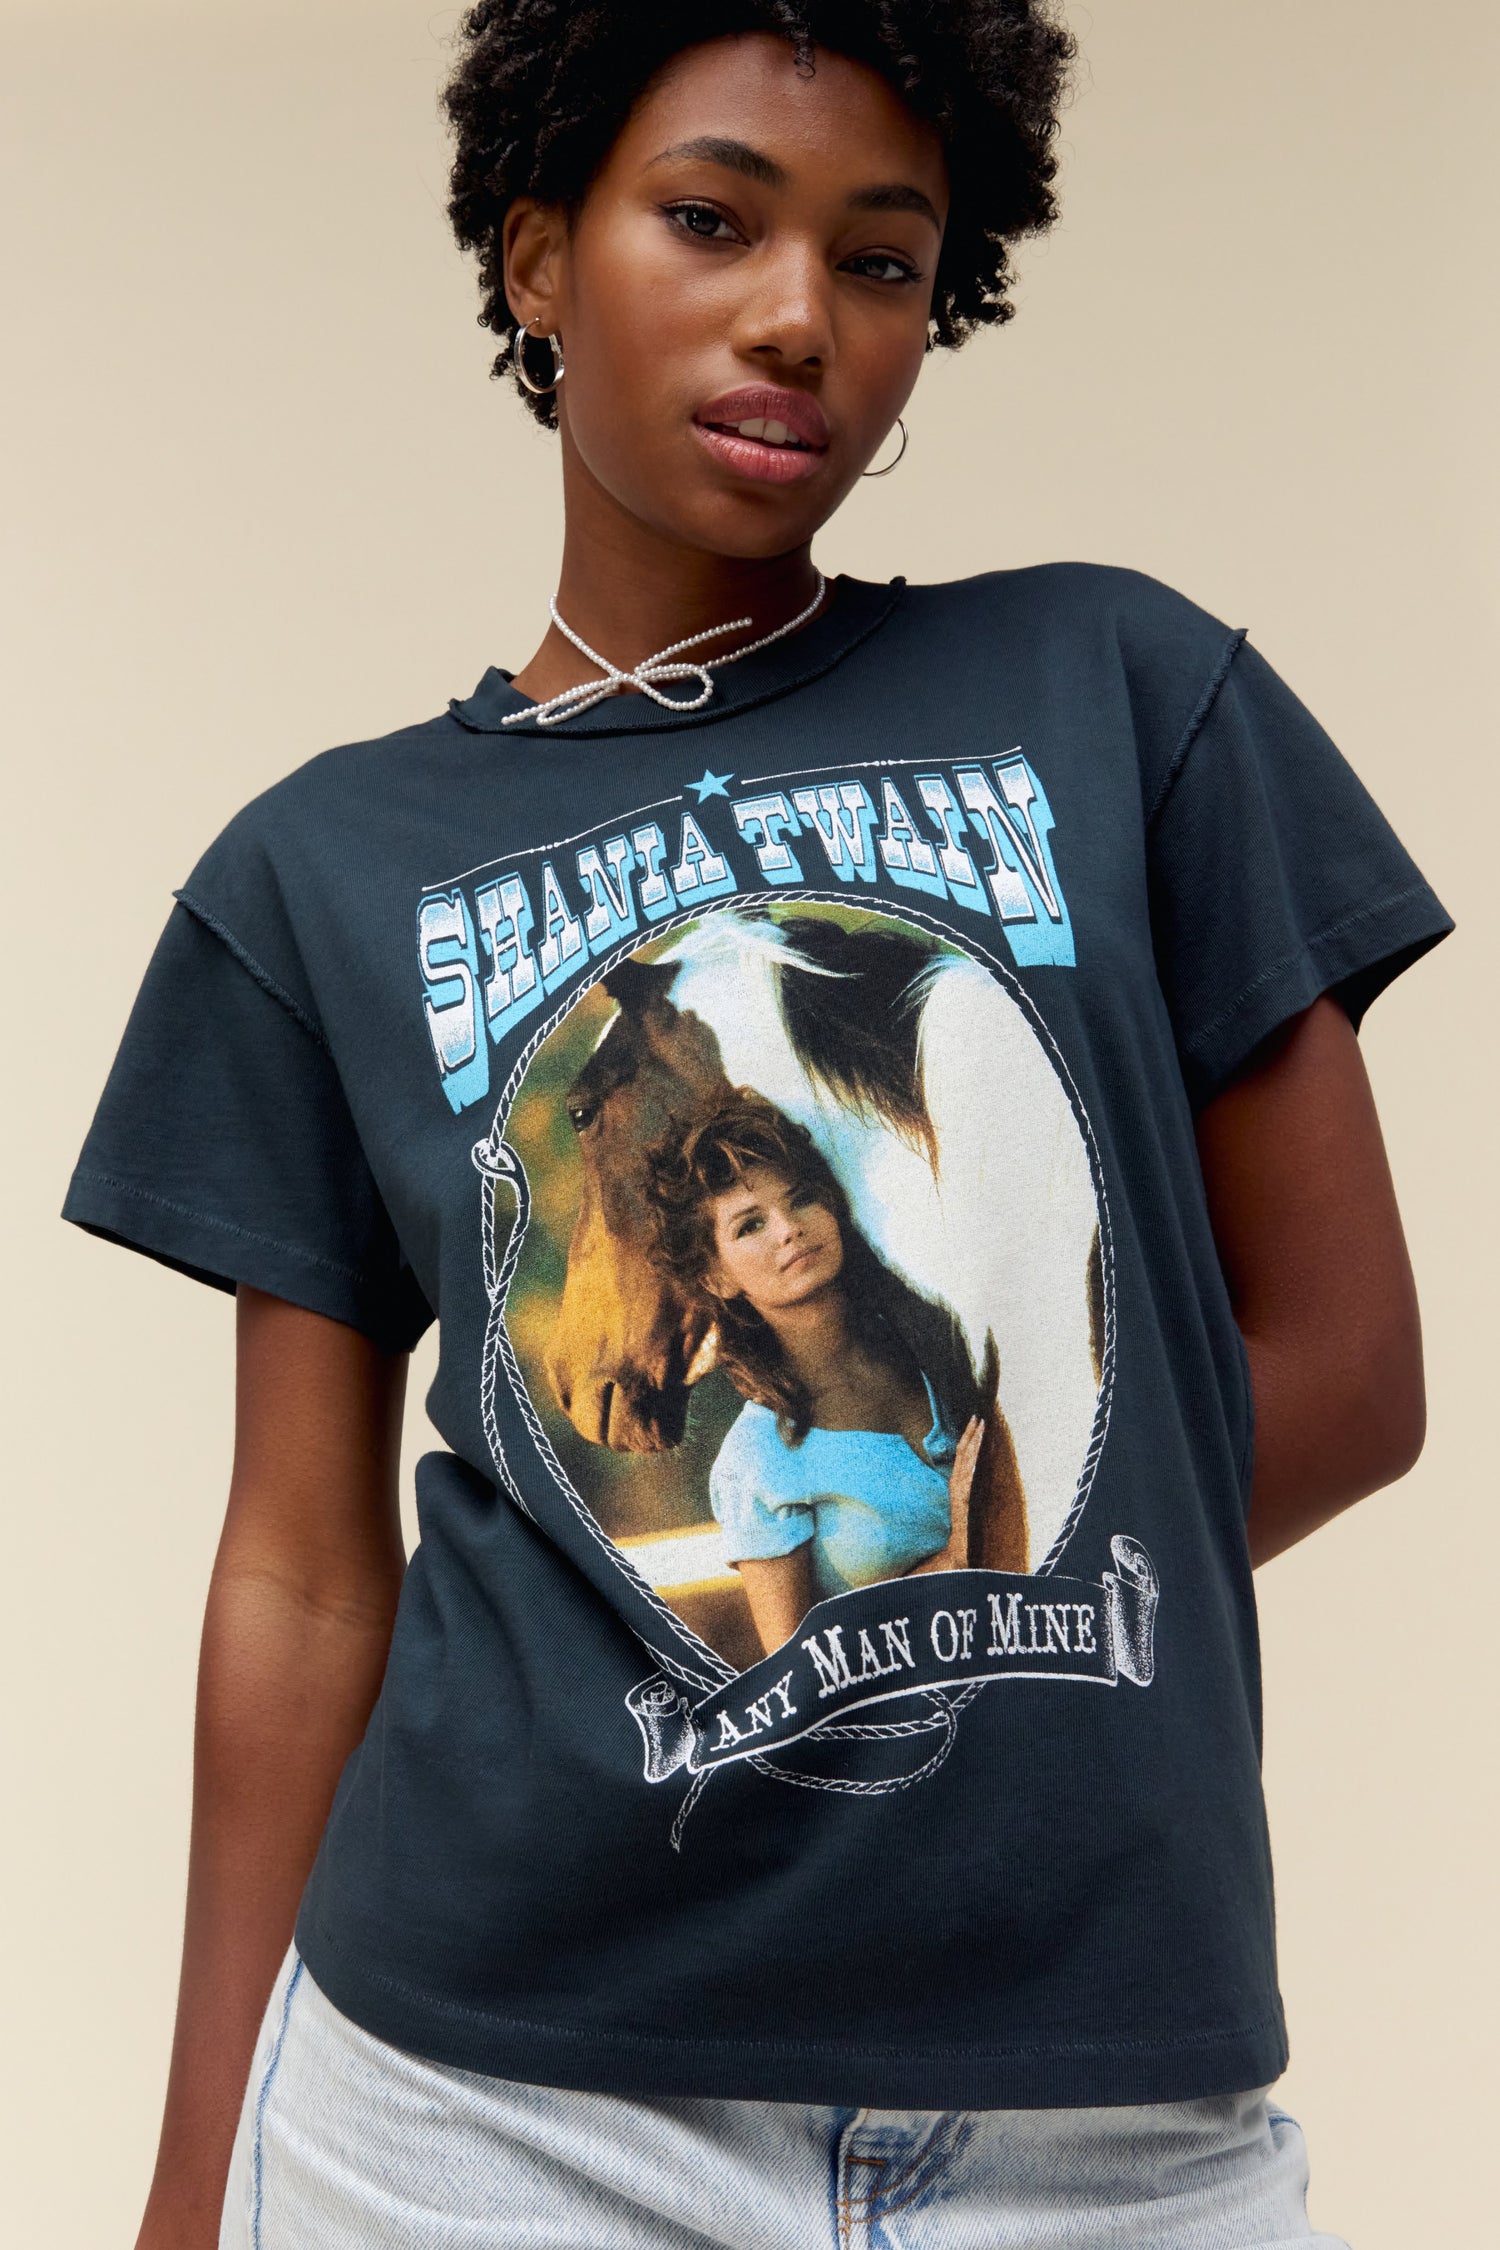 Model wearing a Shania Twain 'Any Man of Mine' graphic tee in vintage black with a reverse seam construction and portrait artwork of the iconic country singer